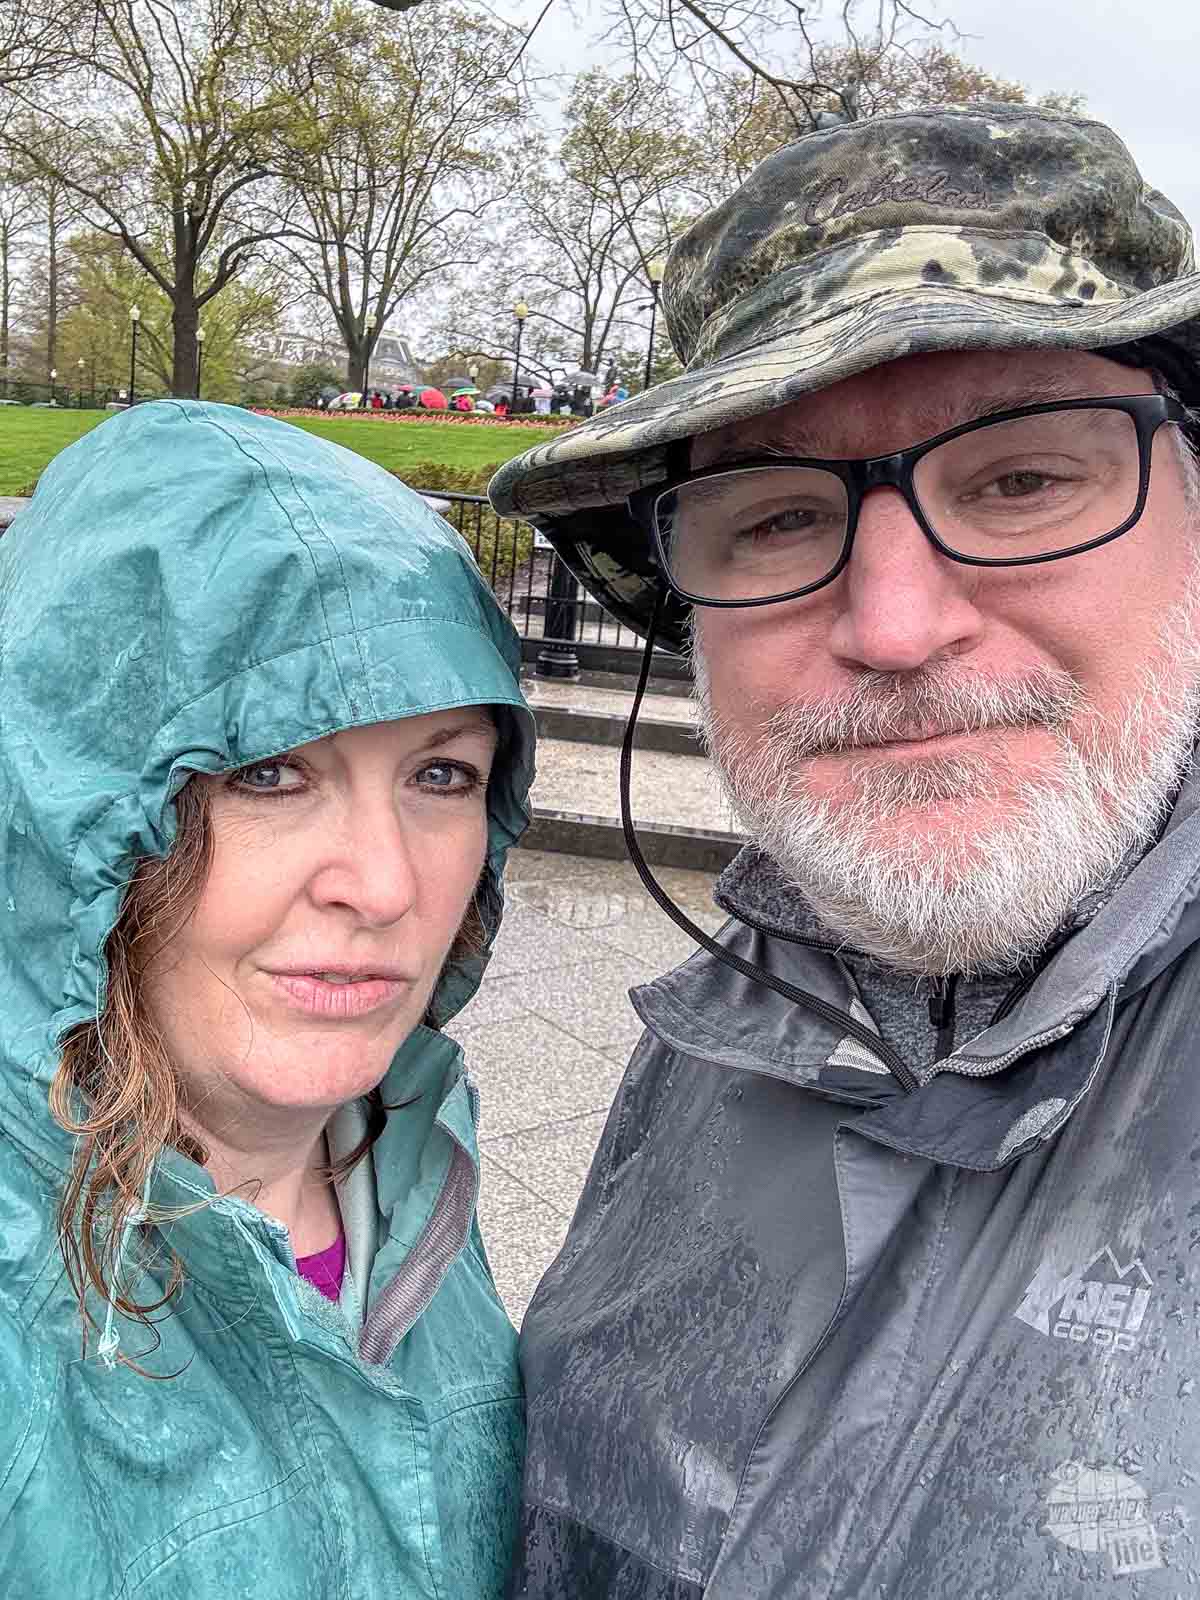 Grant and Bonnie taking a selfie in the rain. Bonnie is wearing a raincoat with a good. Grant is wearing a raincoat with a wide-brimmed camoflauge hat.